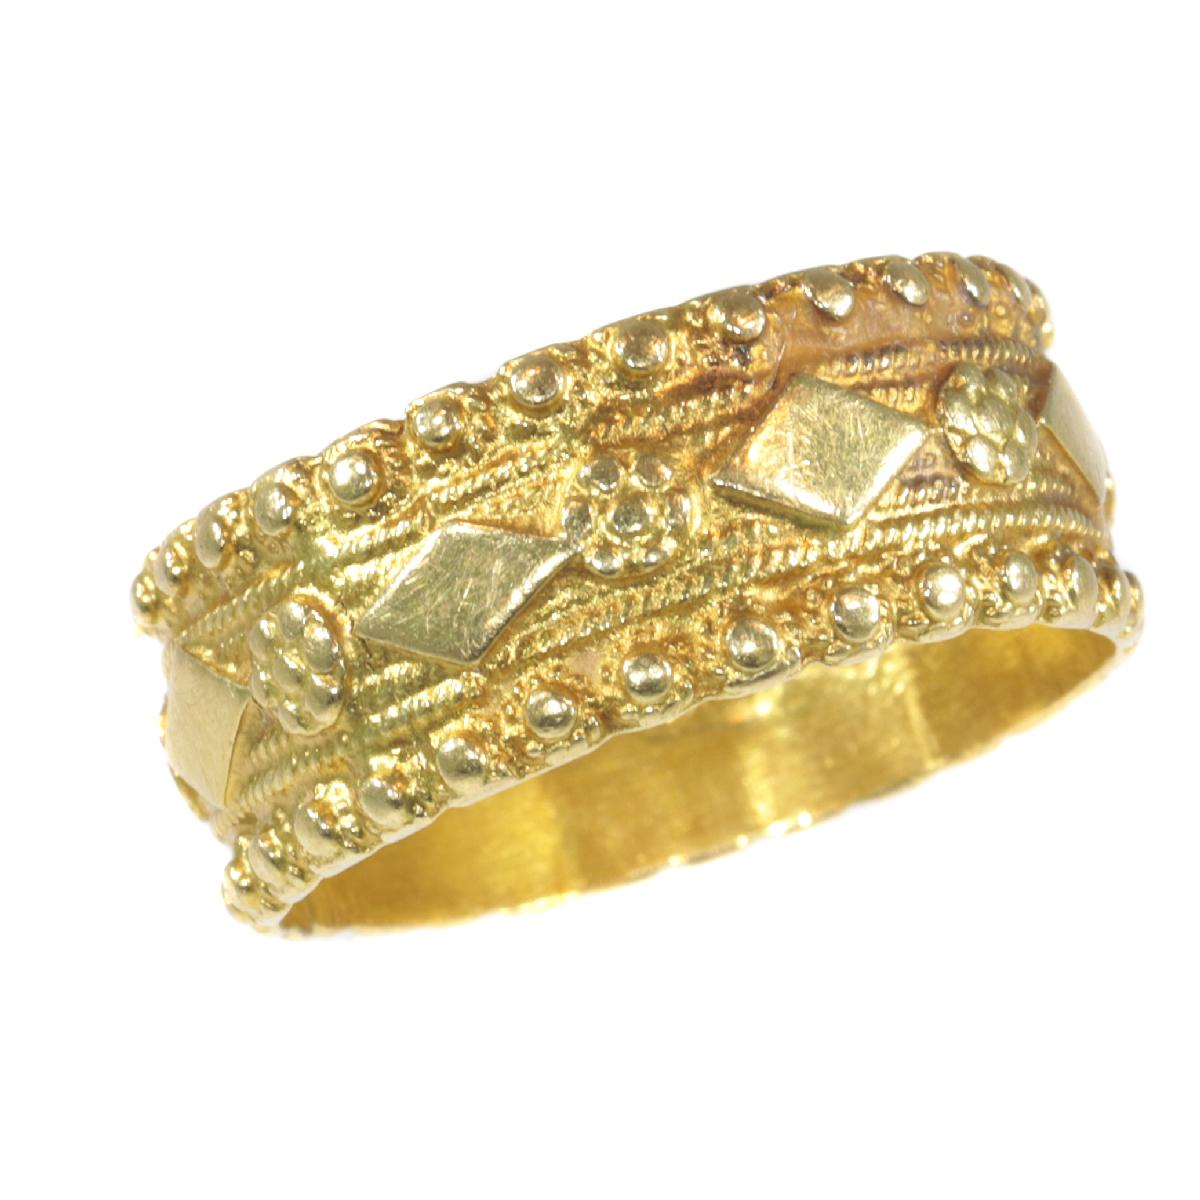 Late 18th Century Rococo Dutch Gold Ring with Amsterdam Hallmarks, 1780s For Sale 2